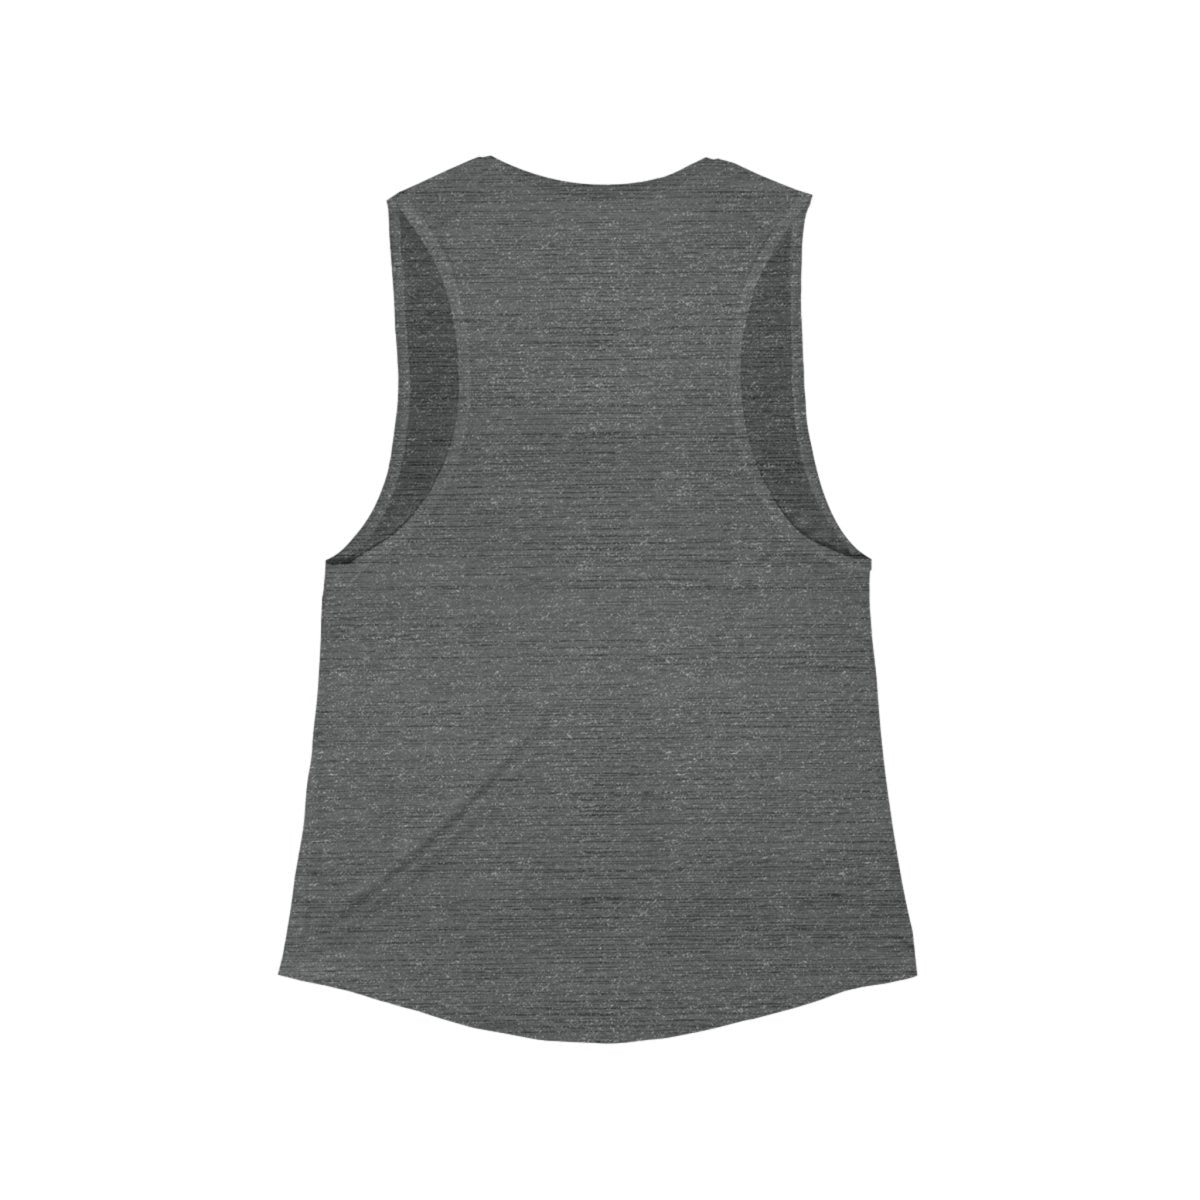 Cougars (Name) Women's Scoop Muscle Tank